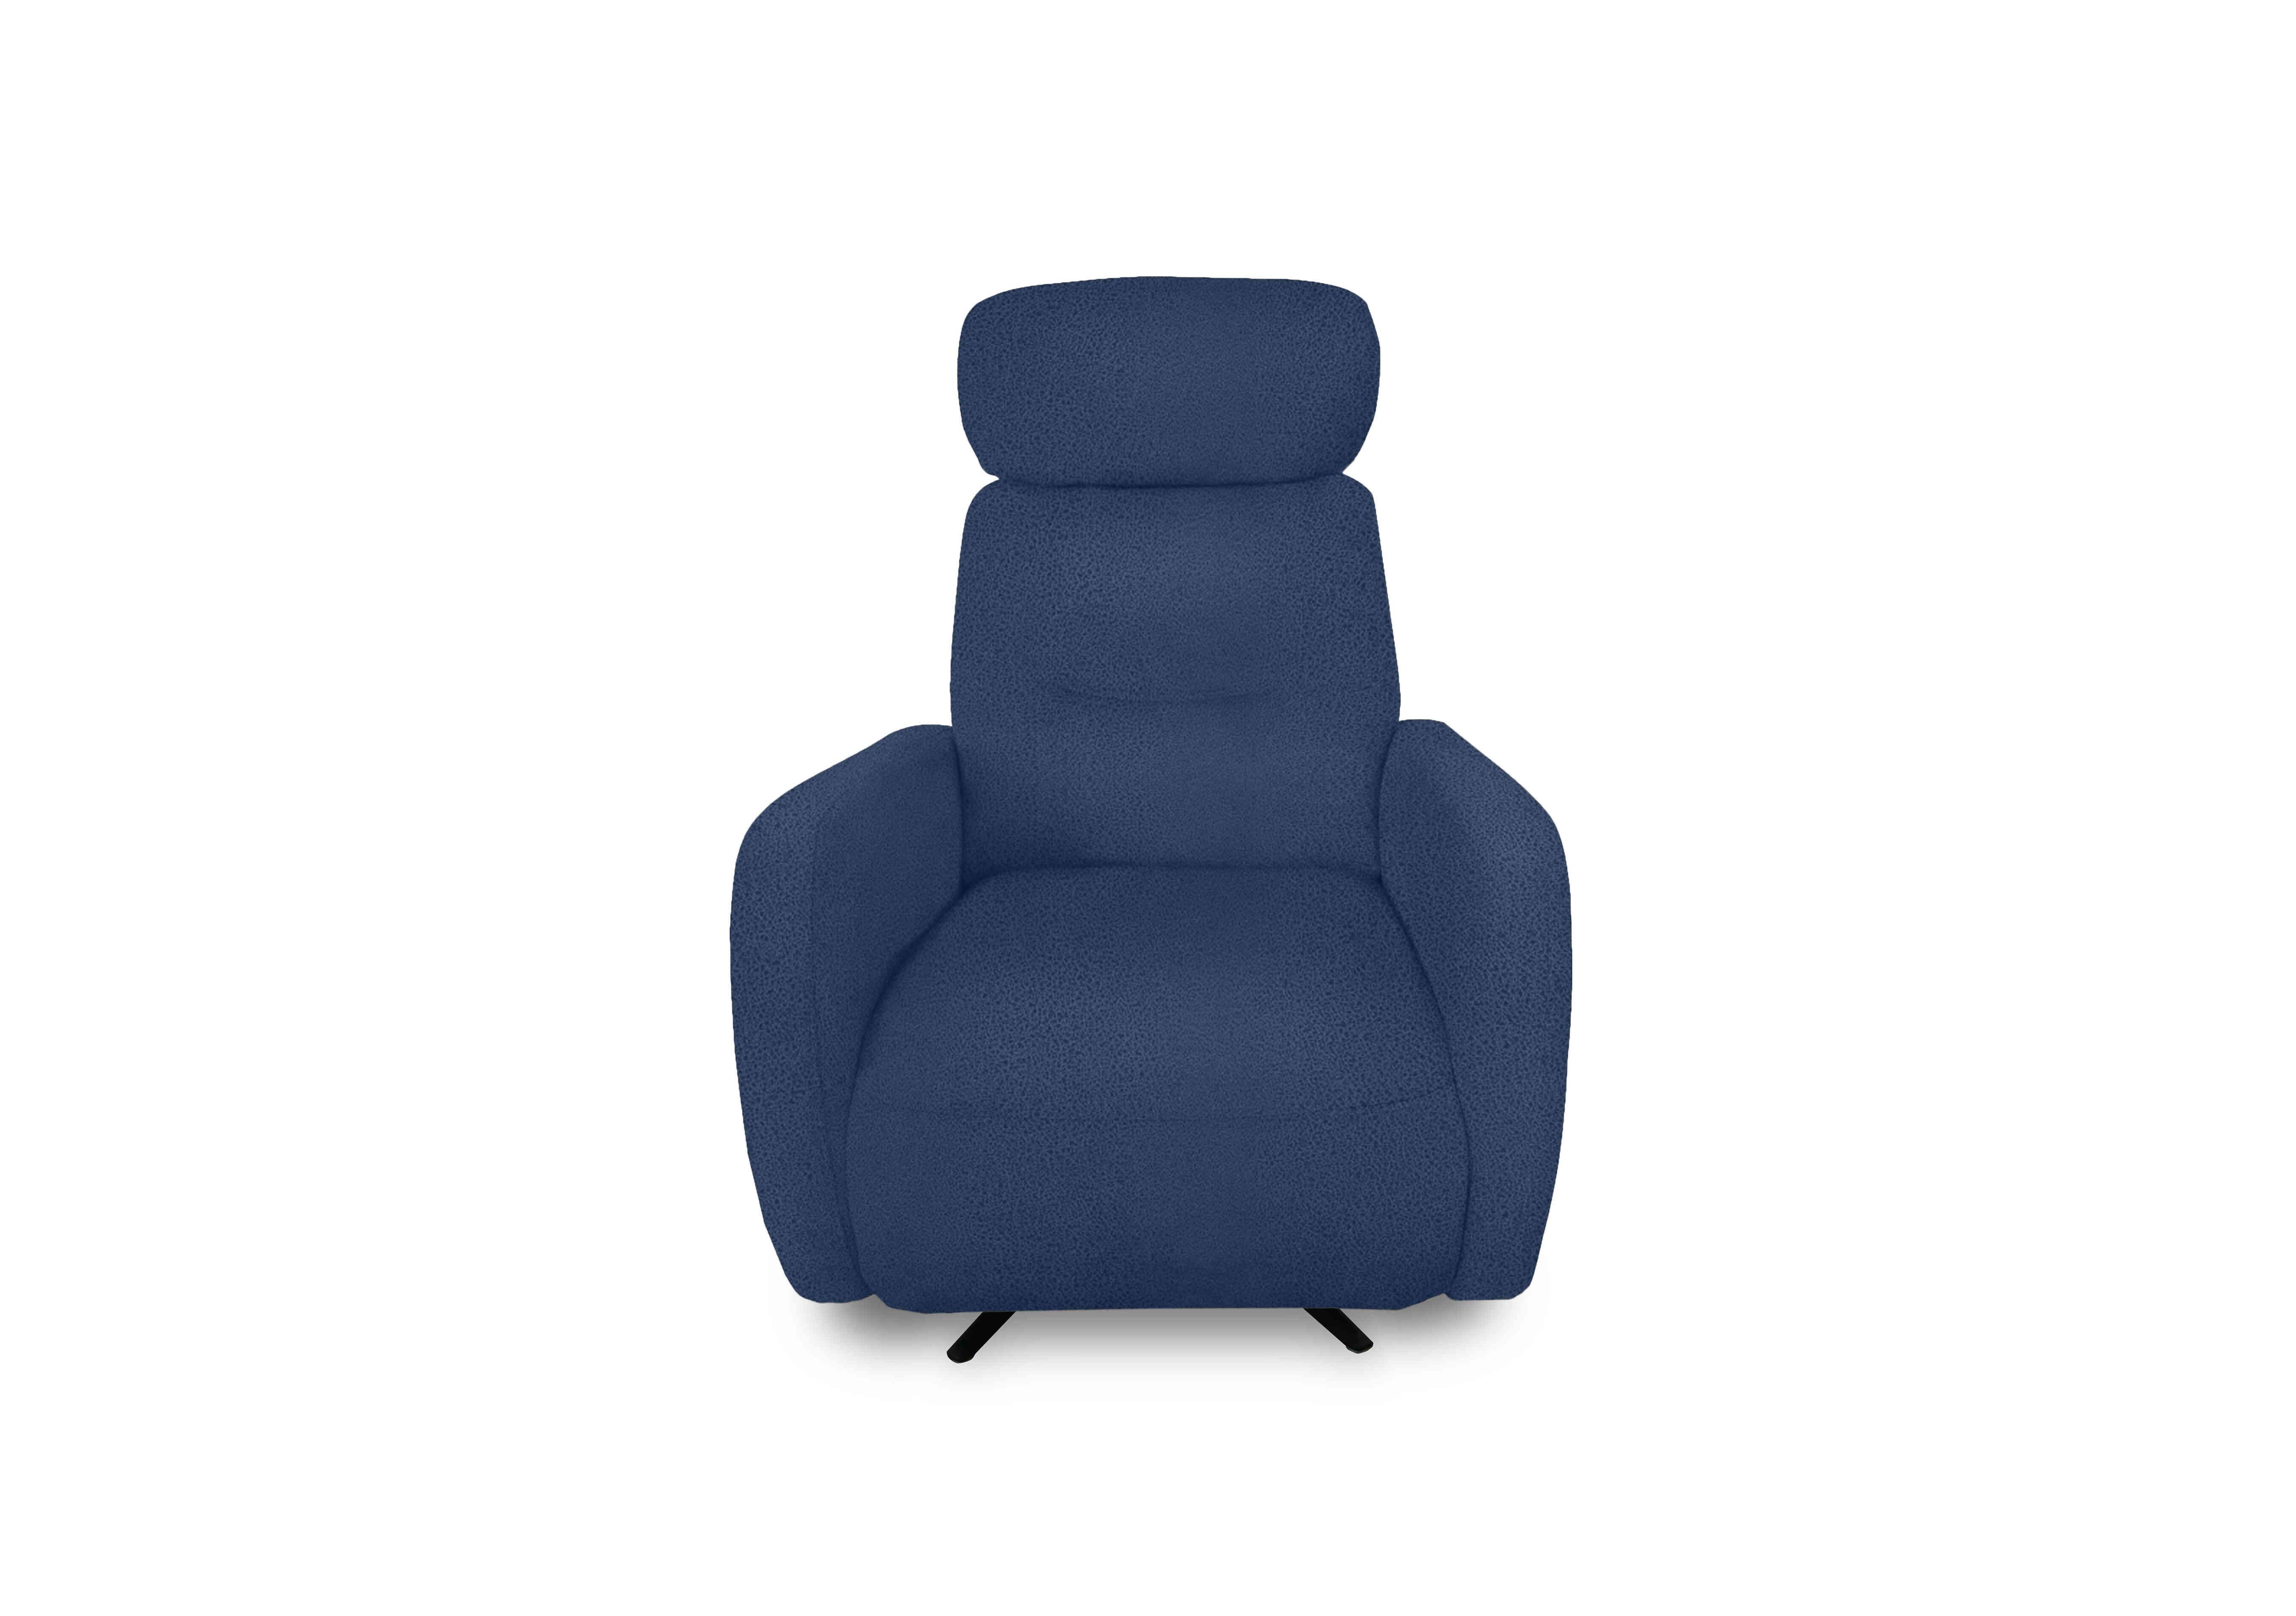 Designer Chair Collection Tokyo Fabric Manual Recliner Swivel Chair in Bfa-Blj-R10 Blue on Furniture Village